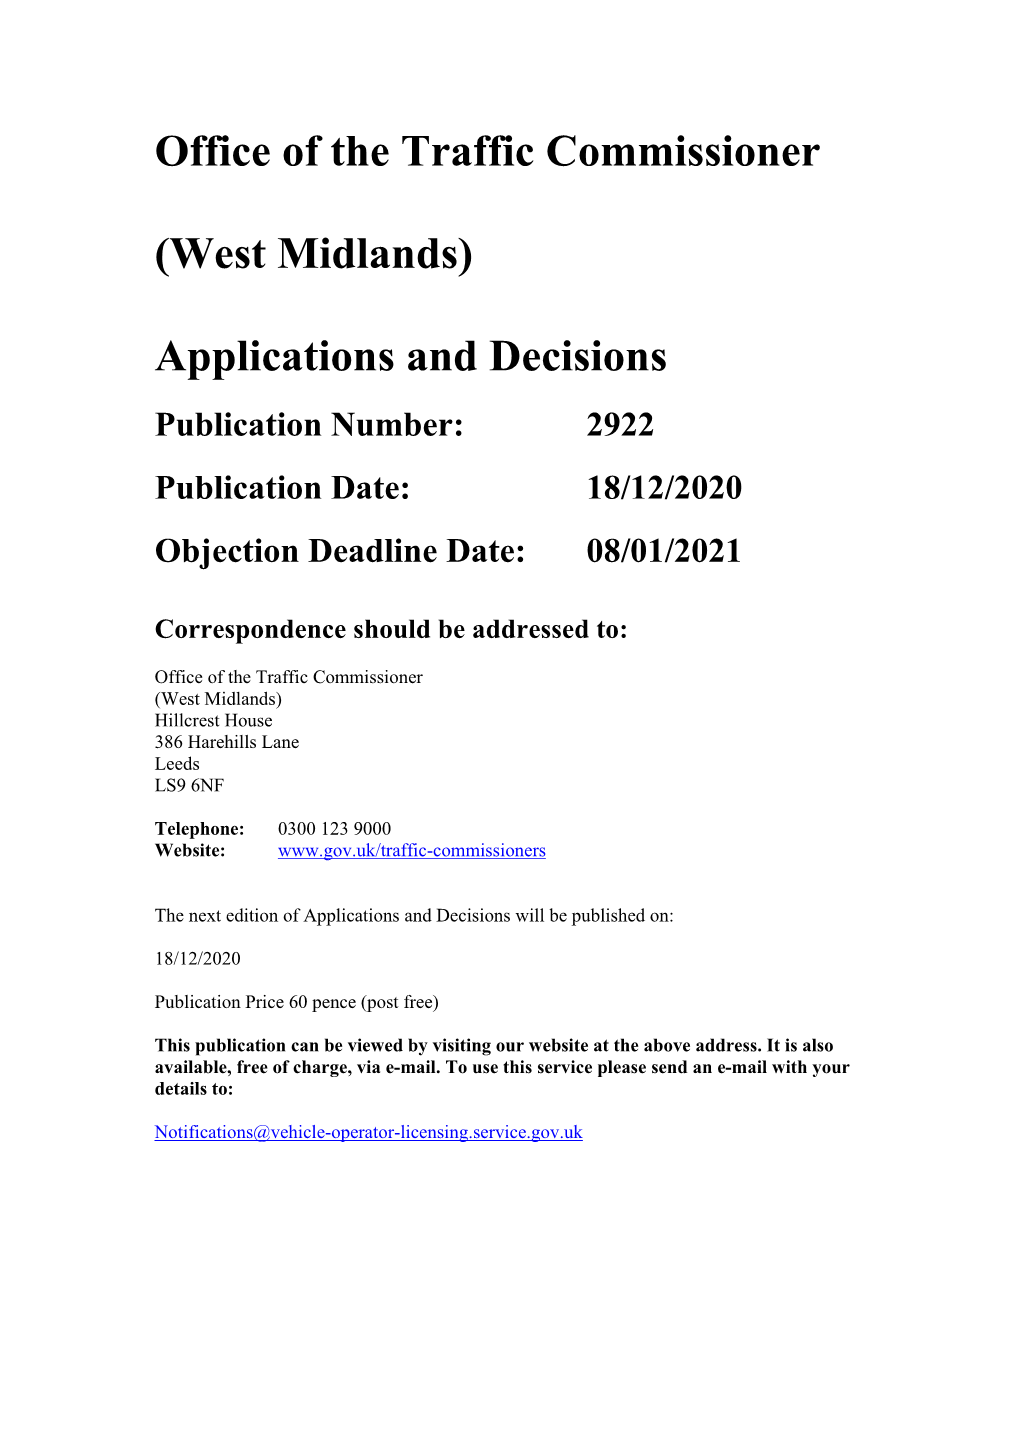 Applications and Decisions for the West Midlands 2922